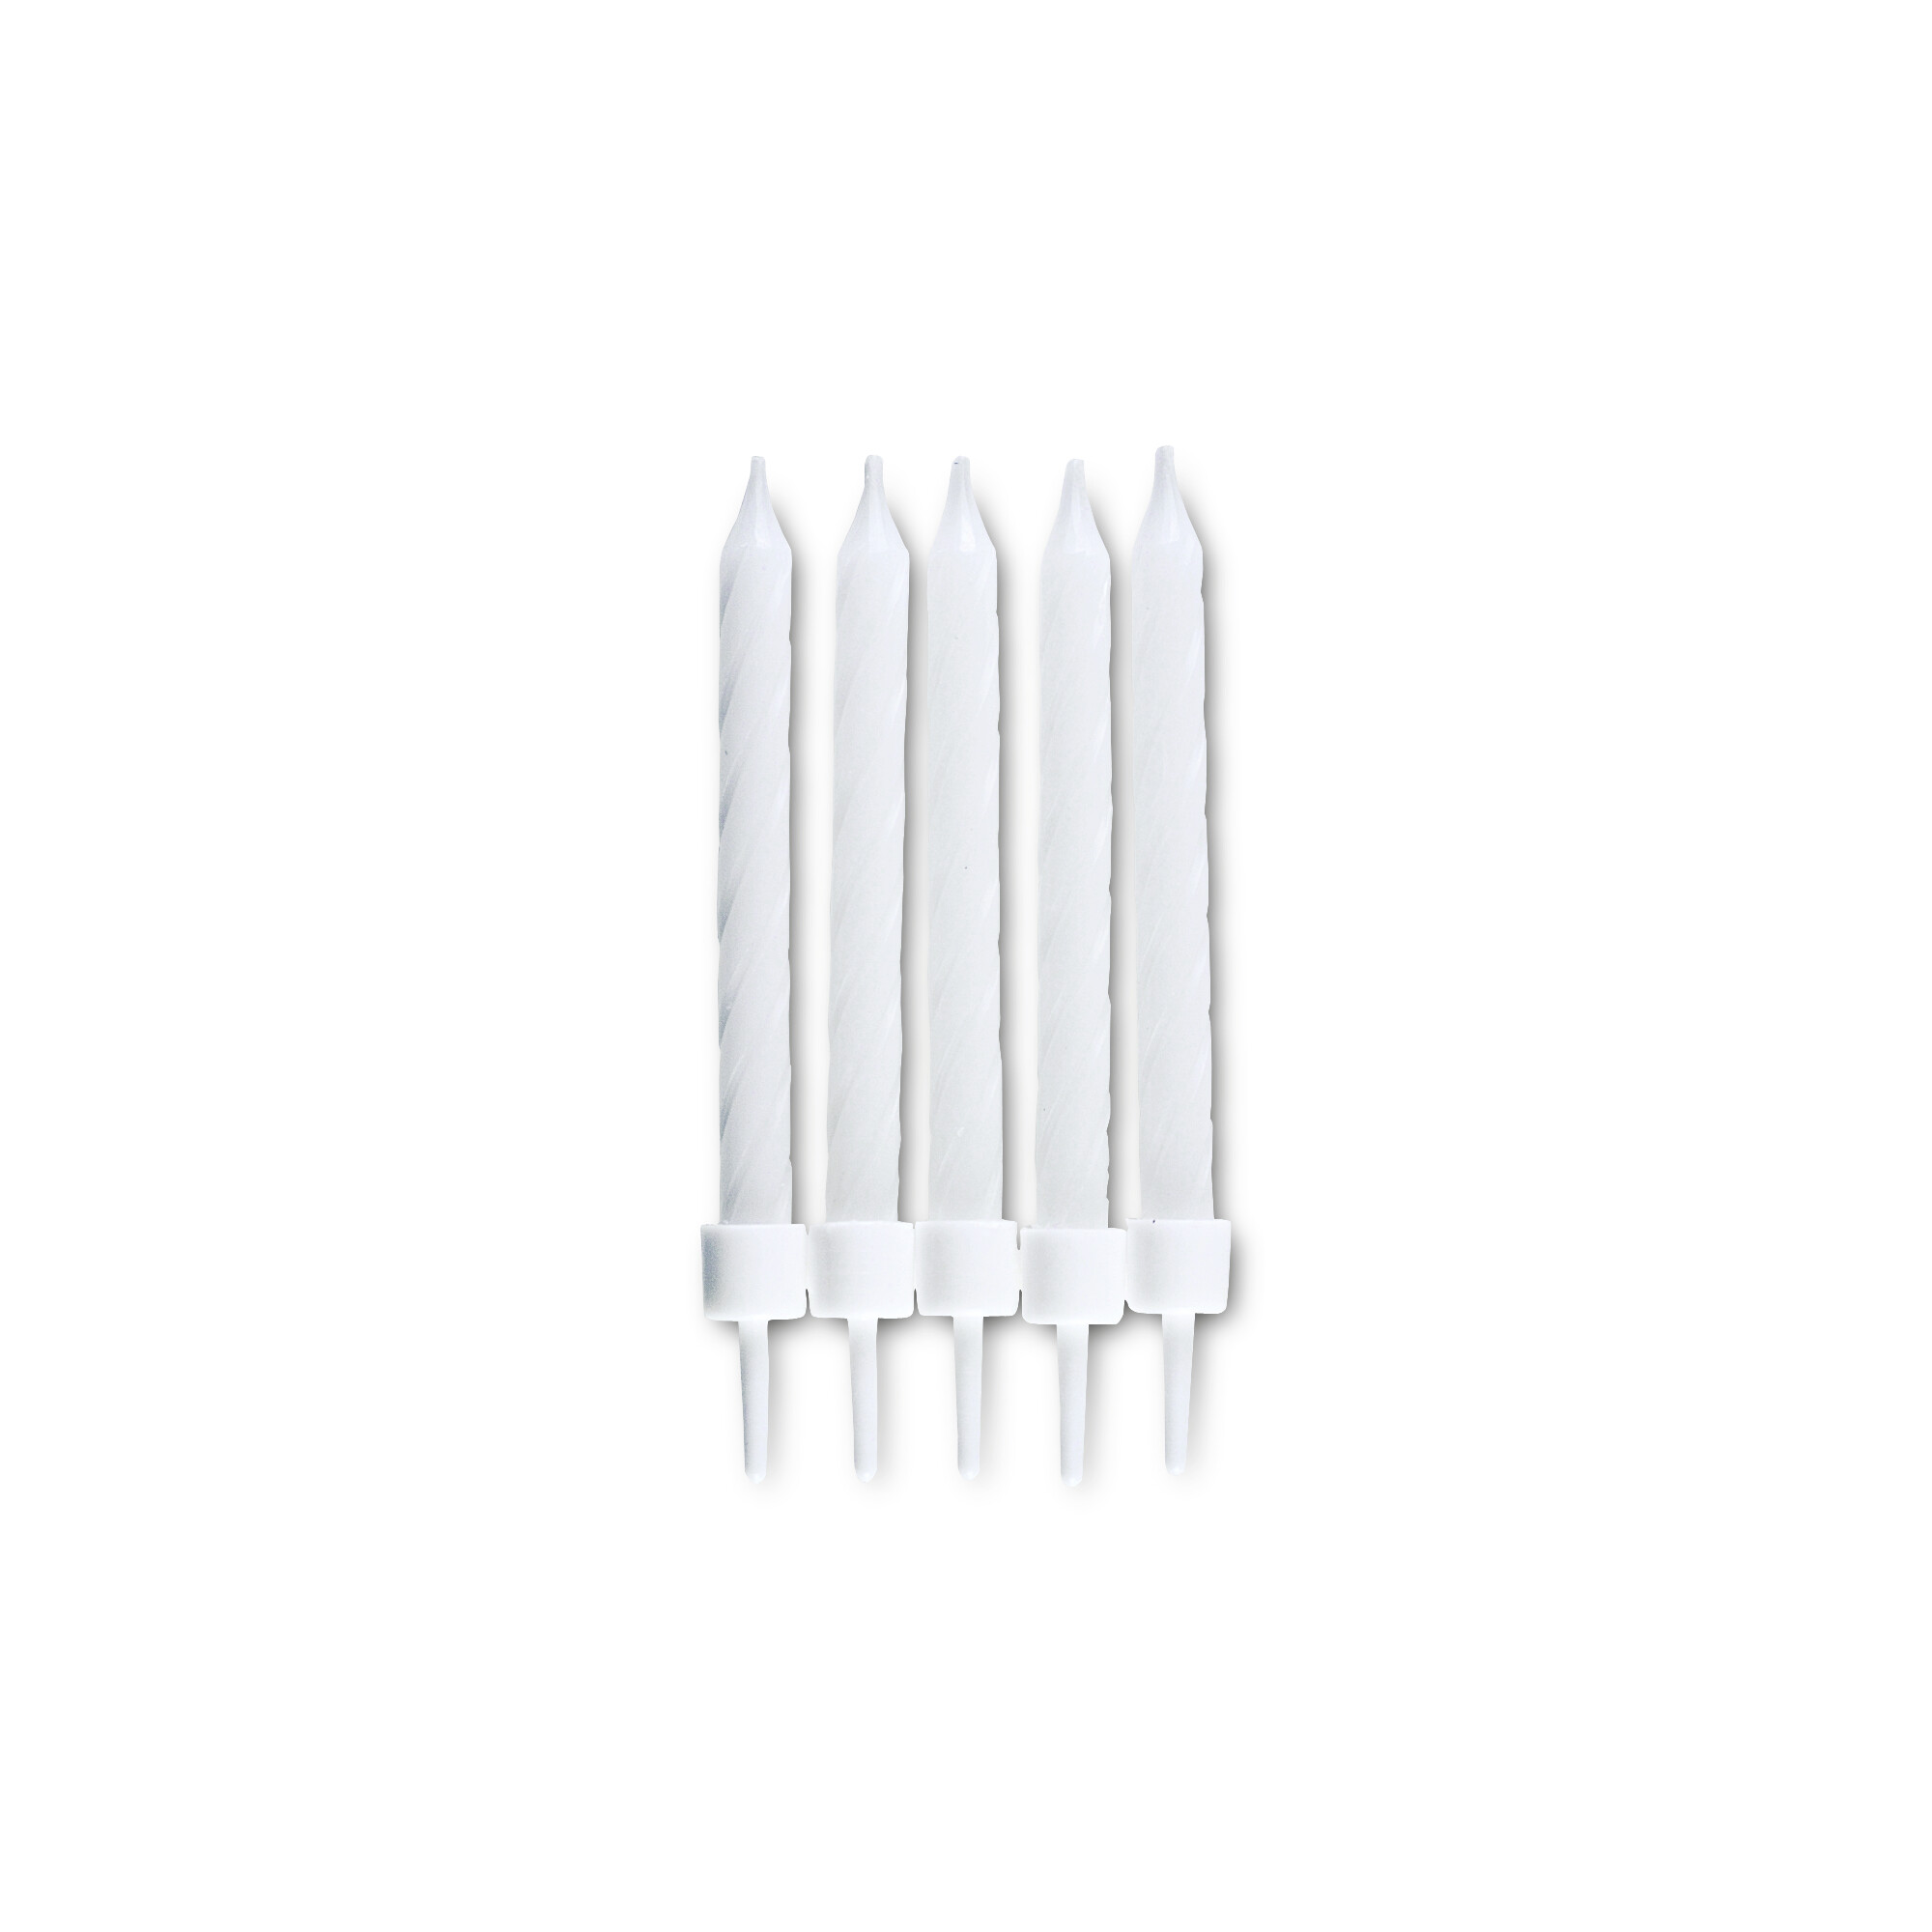 Candles – Birthday – with holder – 10 pieces